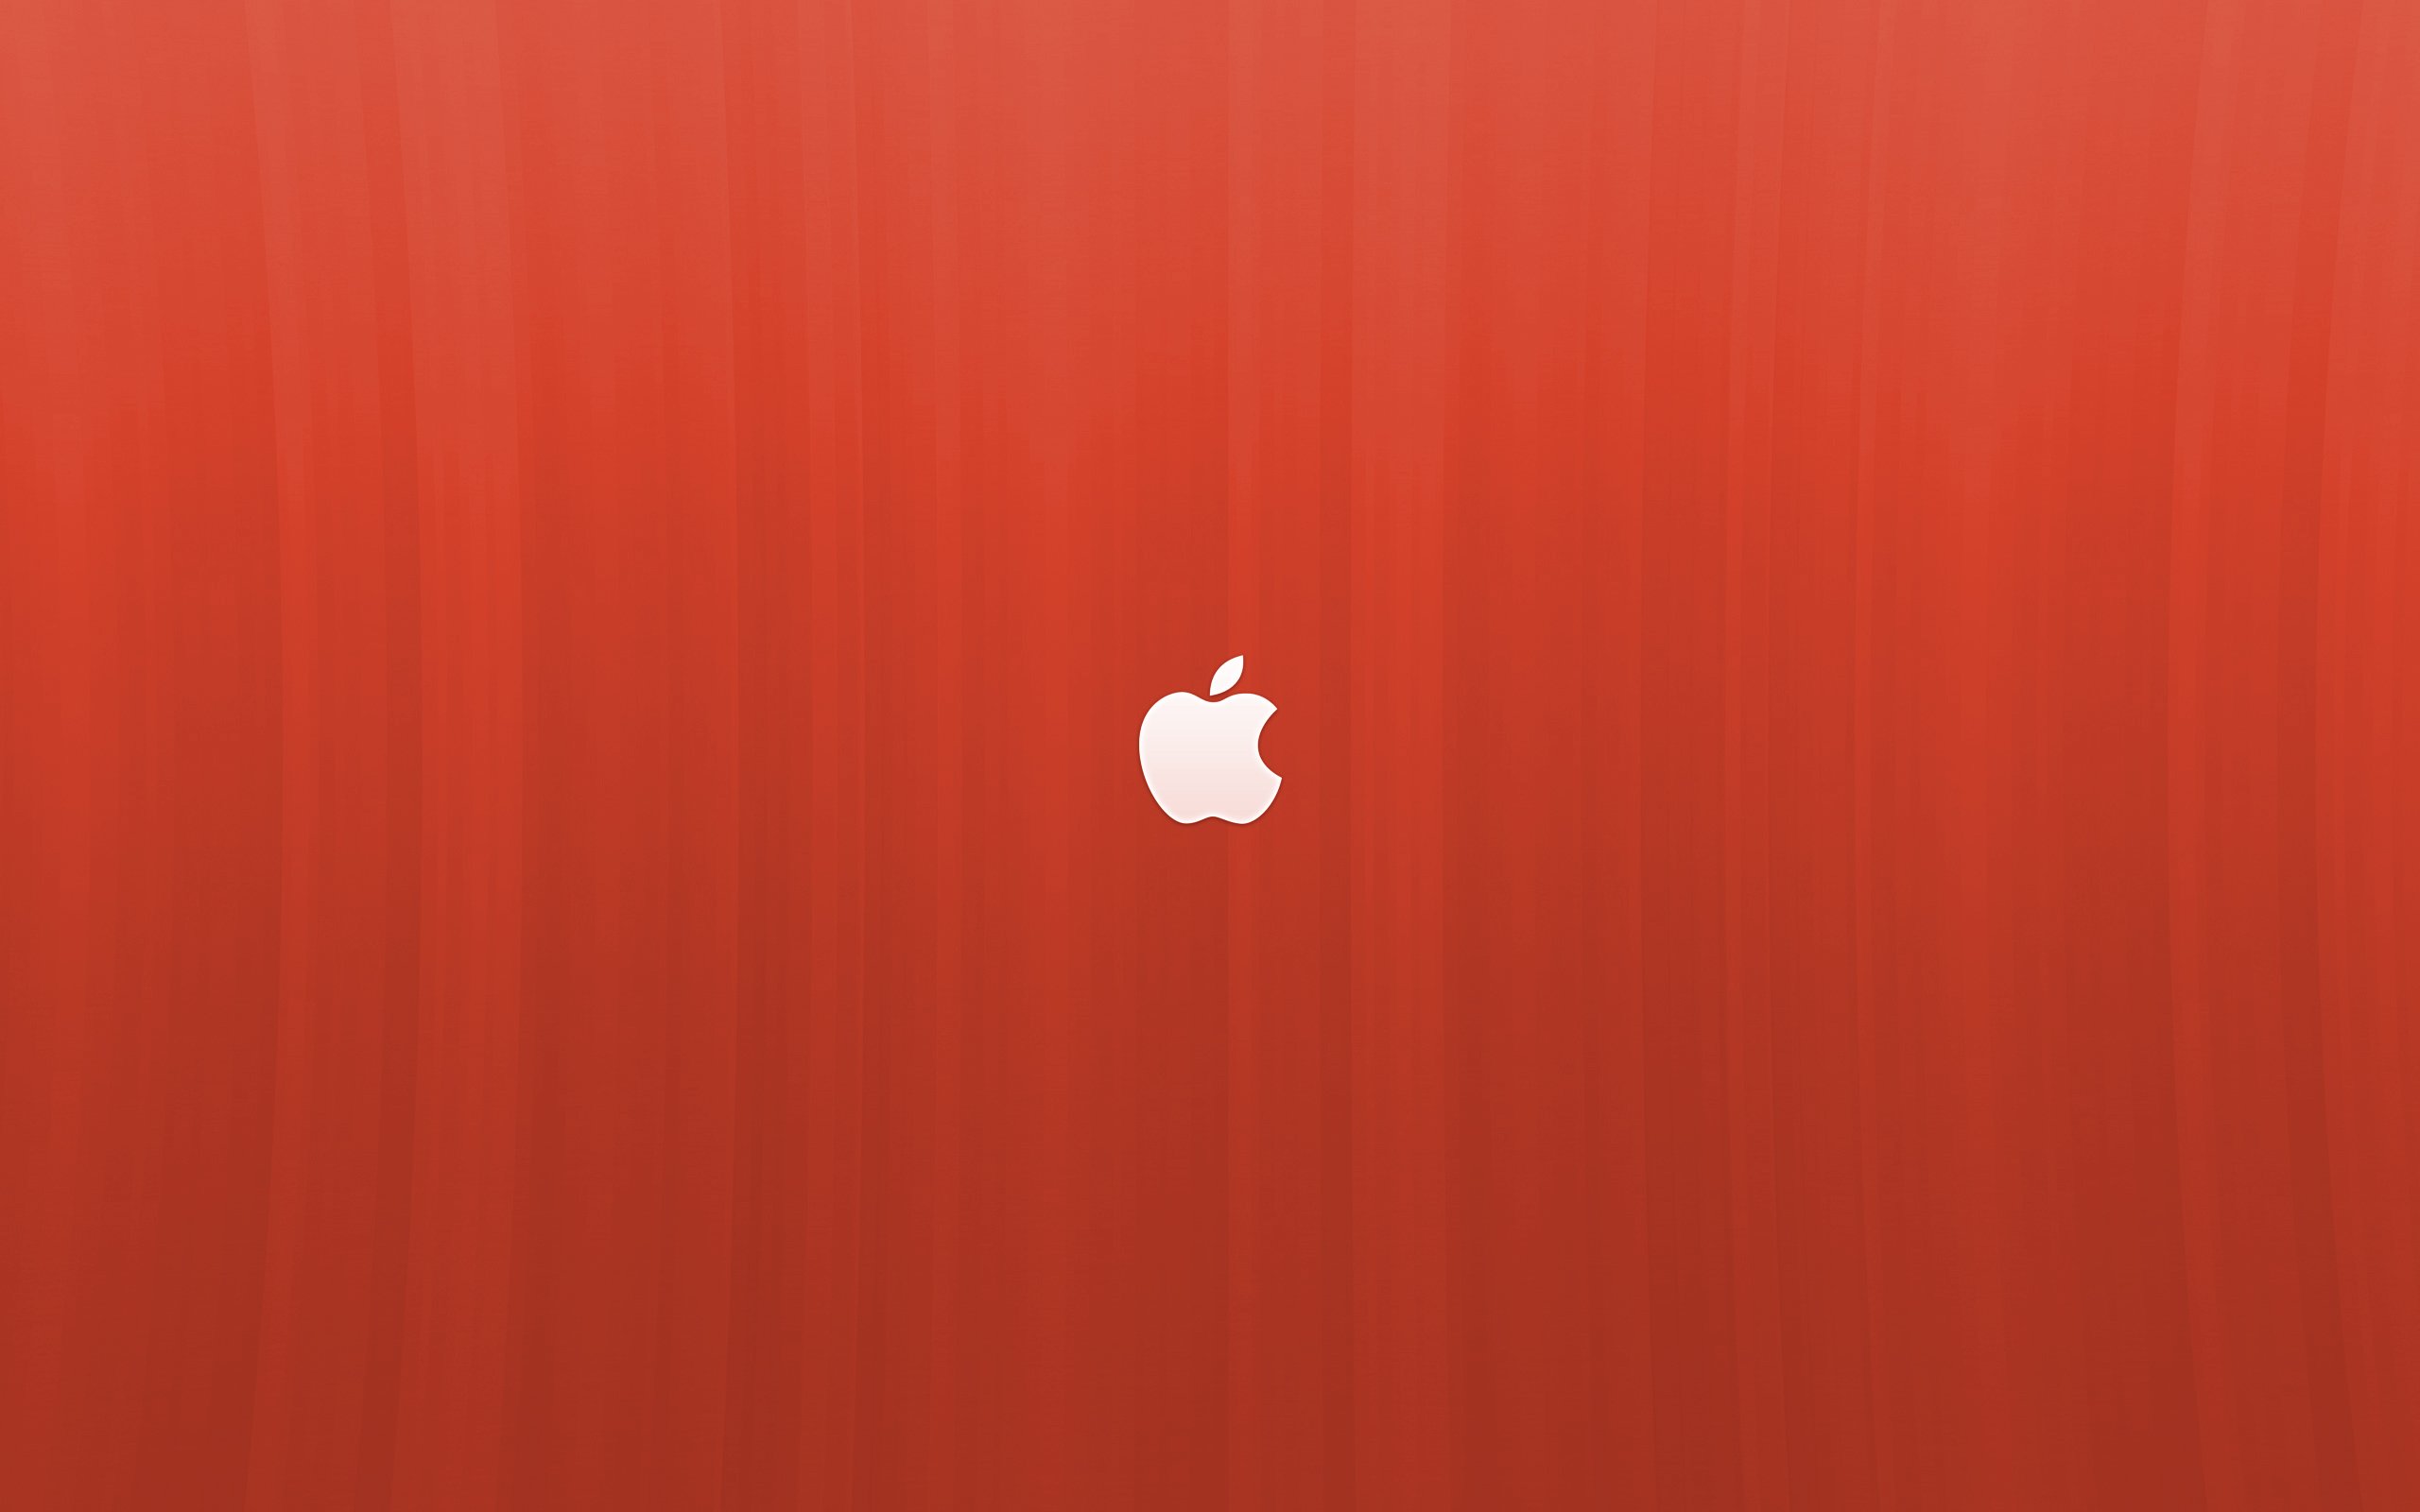 Red Apple Logo Wallpaper Images amp Pictures   Becuo